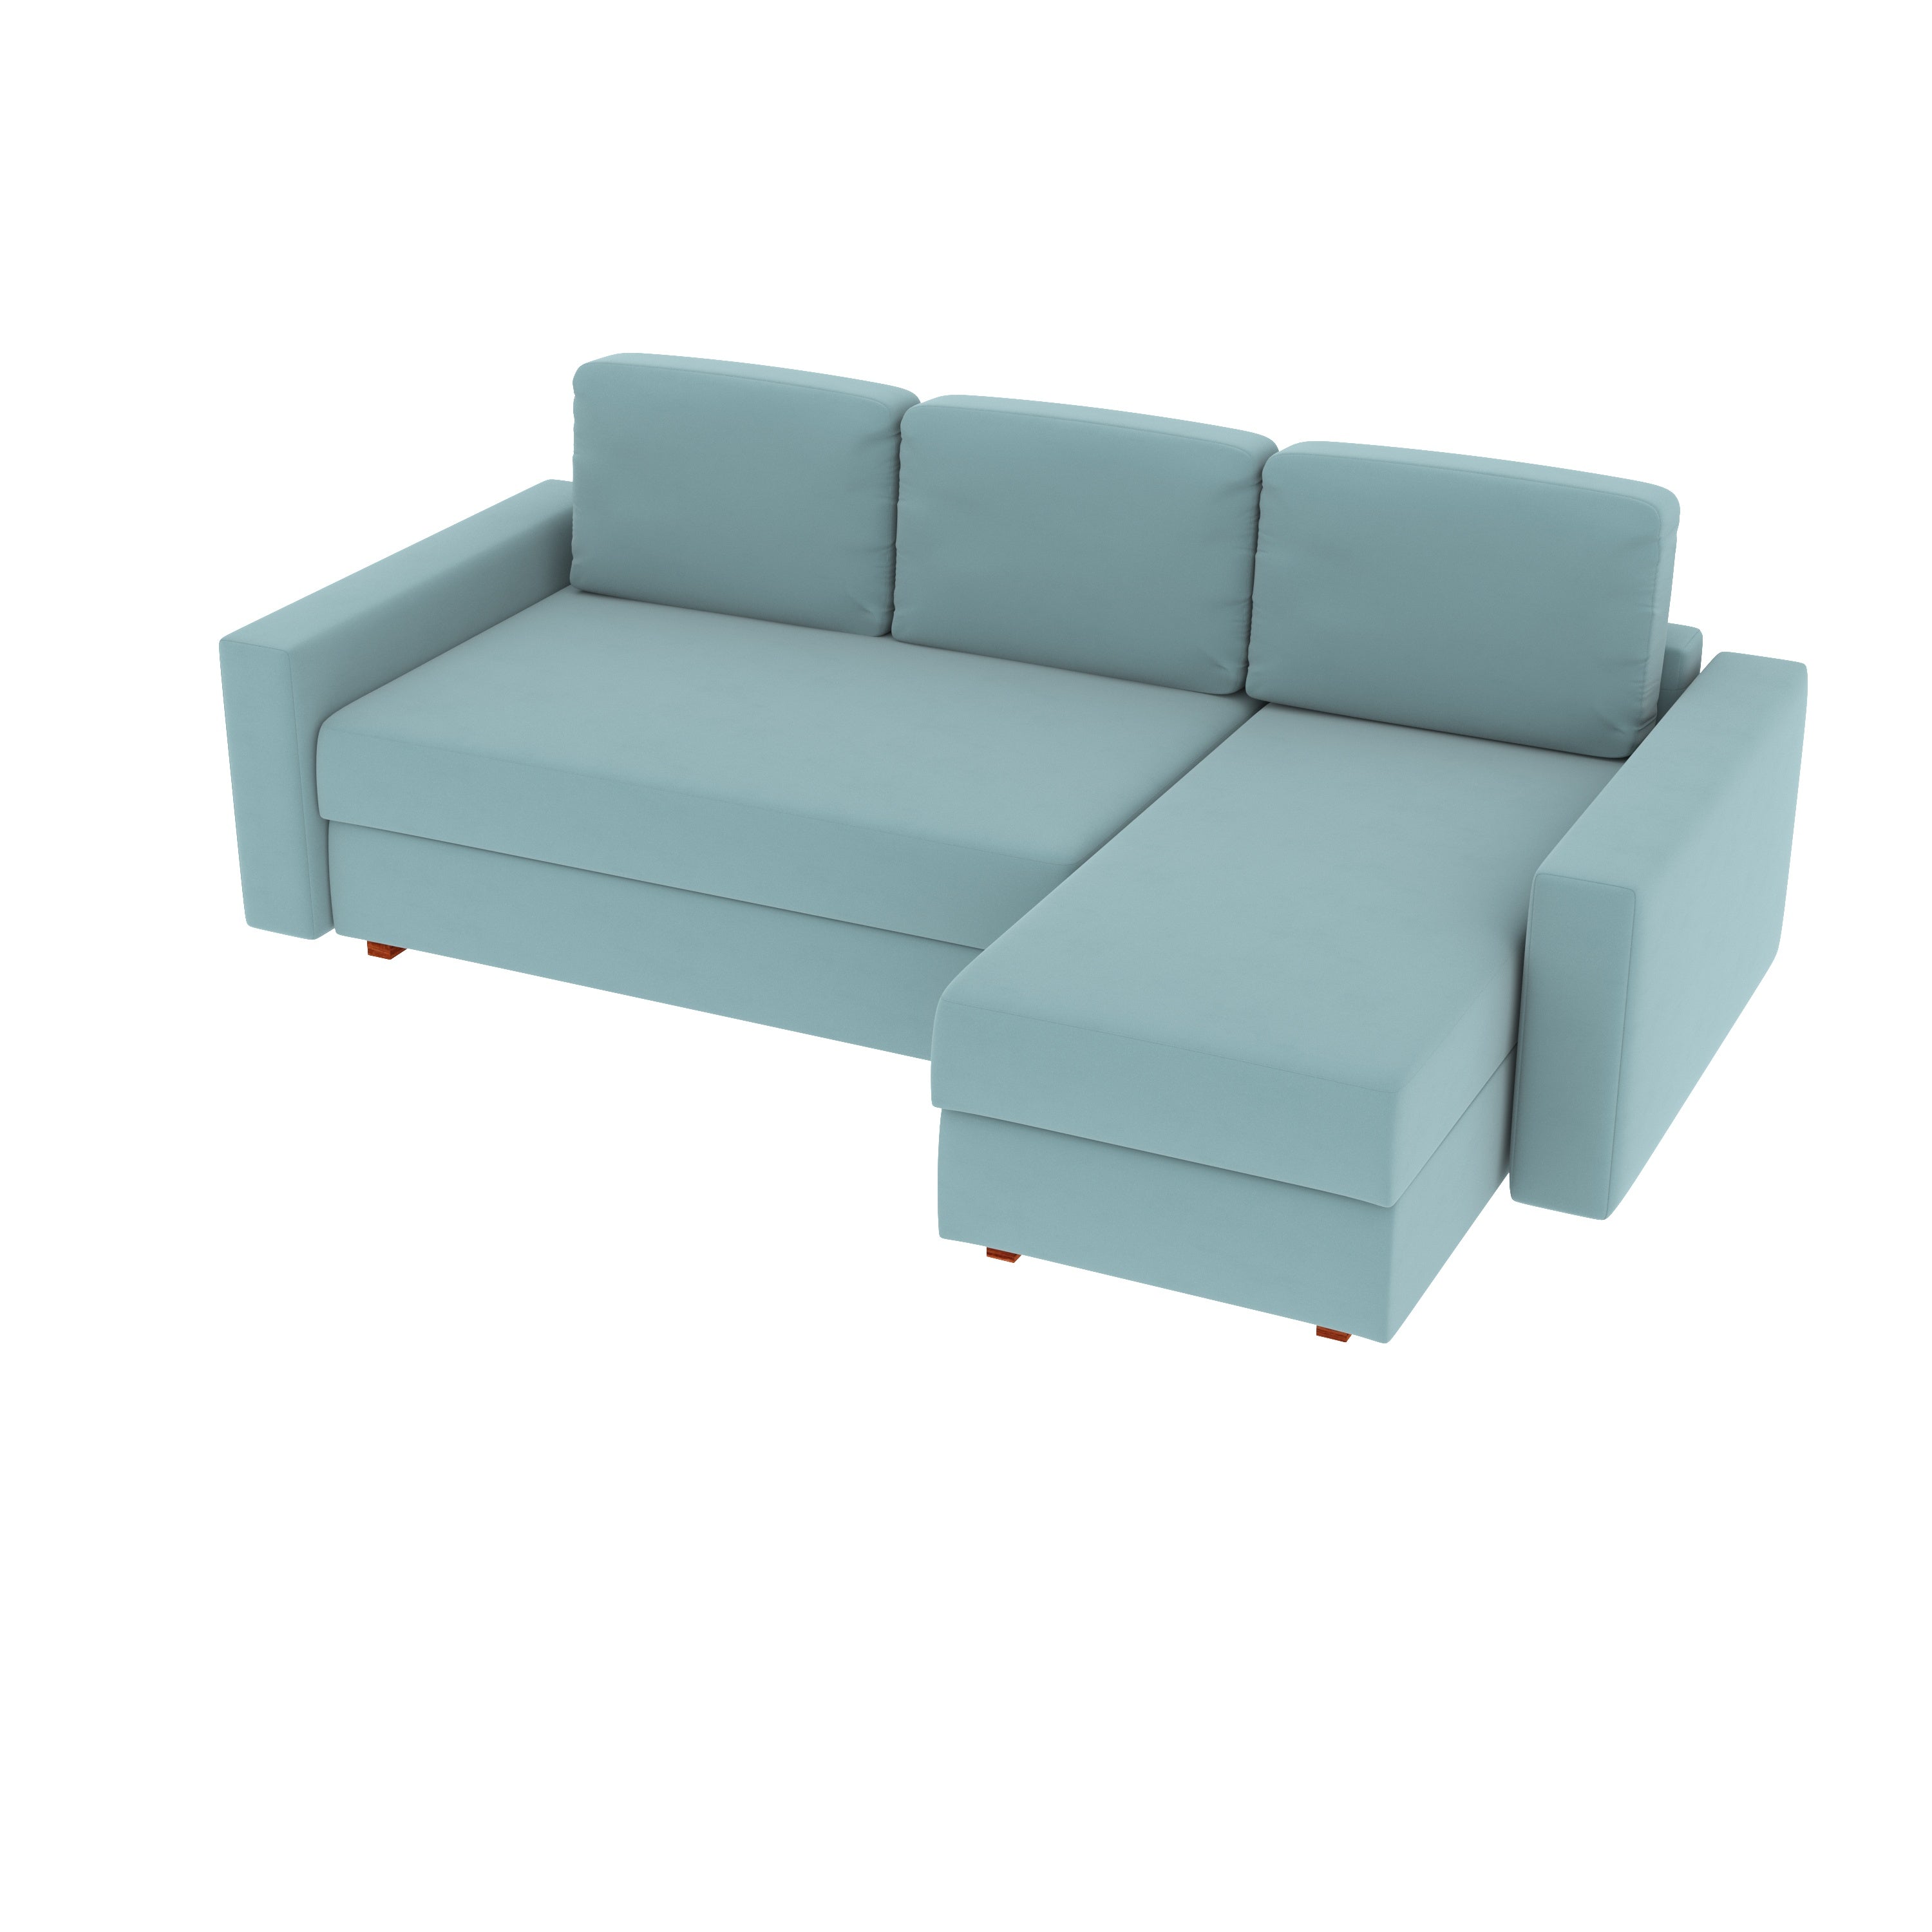 Navvy Blue Pastel Coloured with Premium Comfort L Shaped 3 Seater Sofa Set for Home Sofa